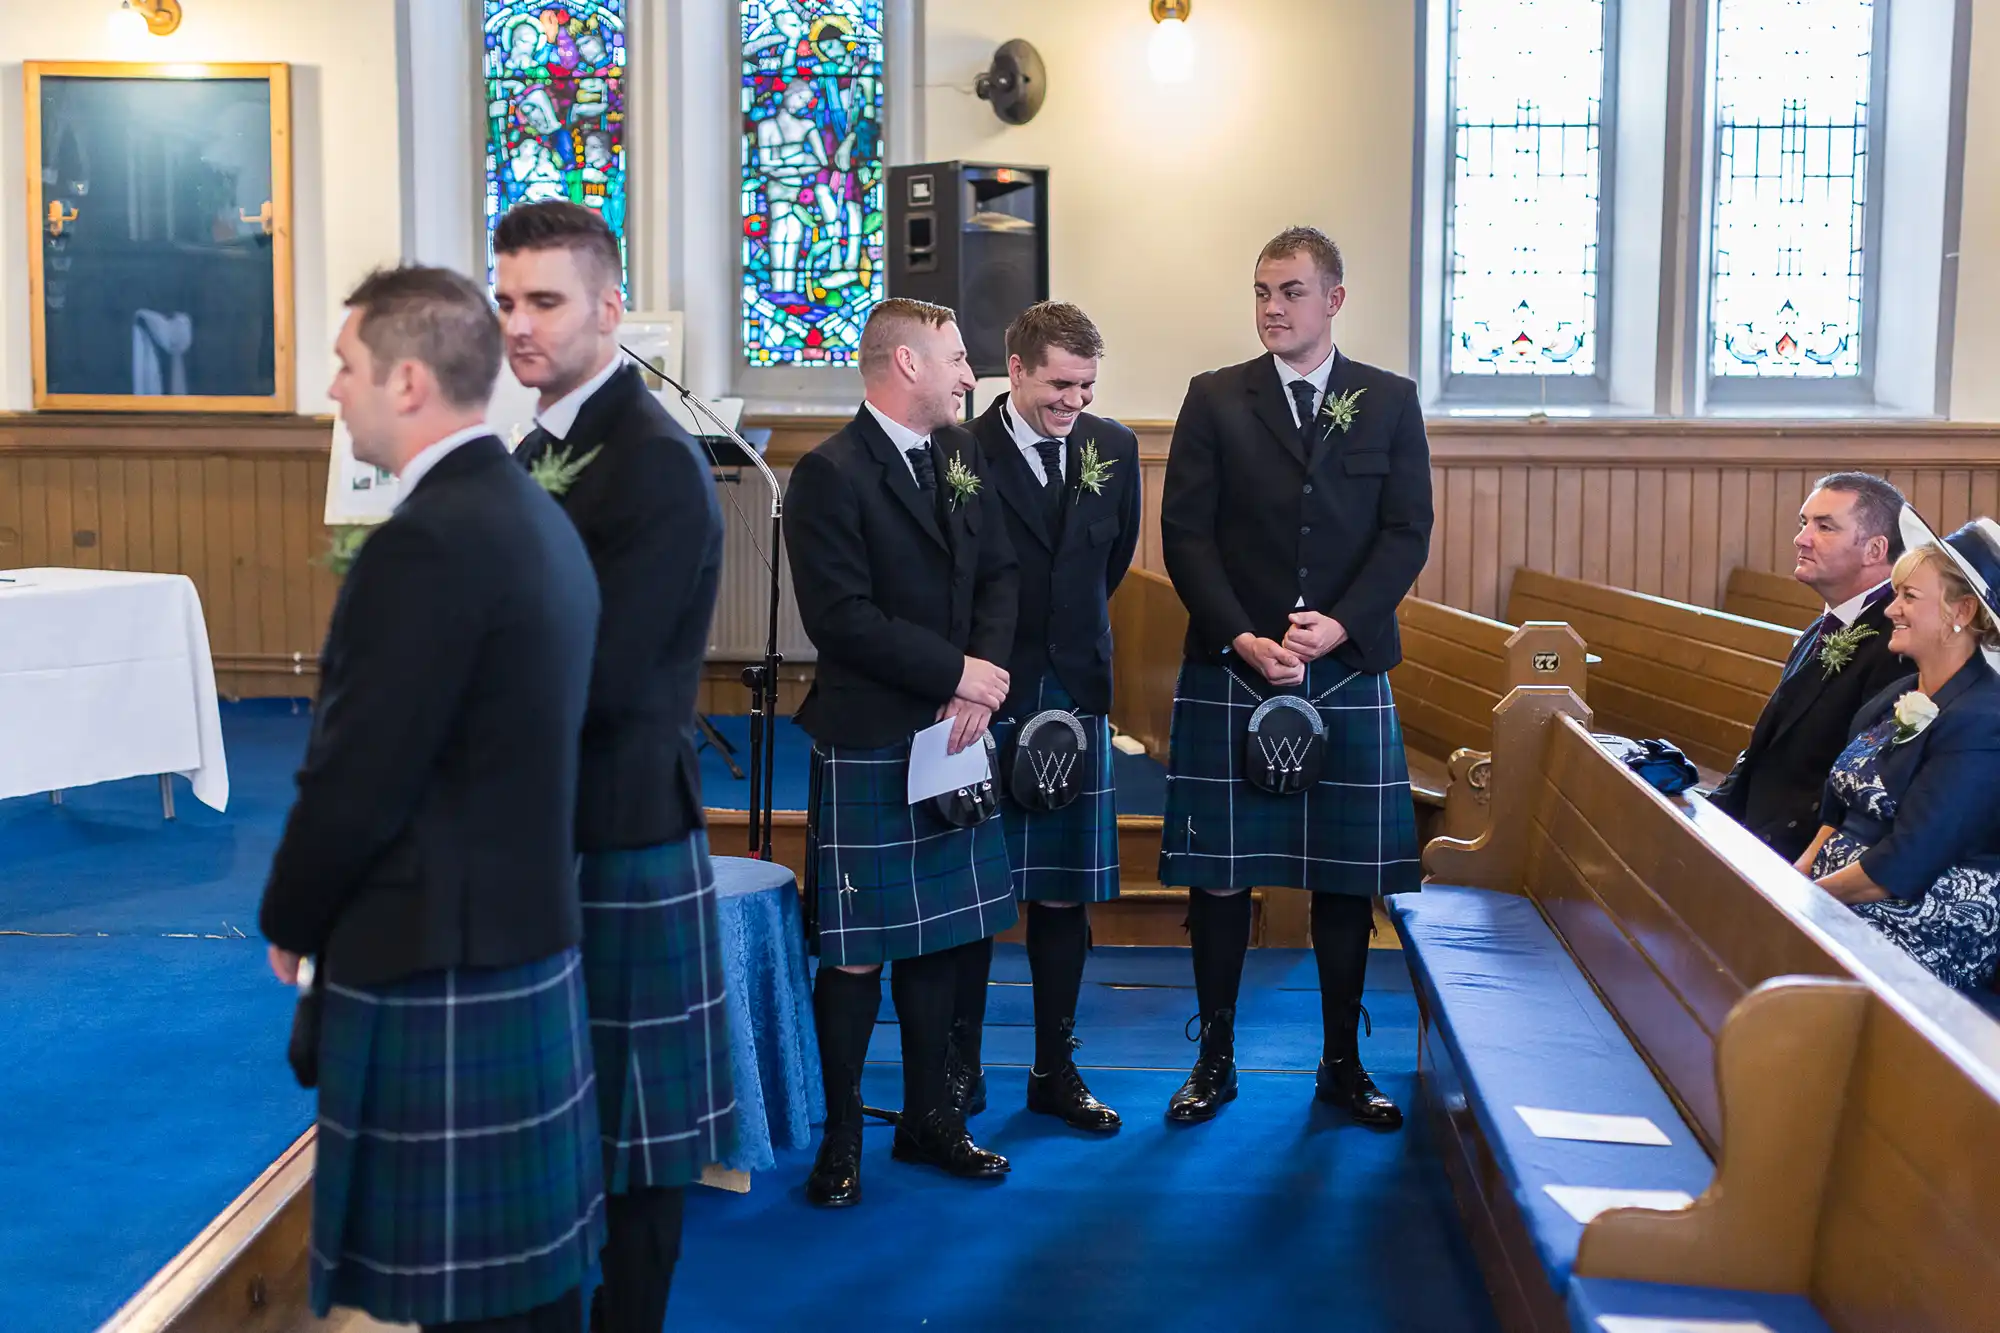 Men in traditional kilts standing inside a church during a wedding ceremony, some chatting and smiling.